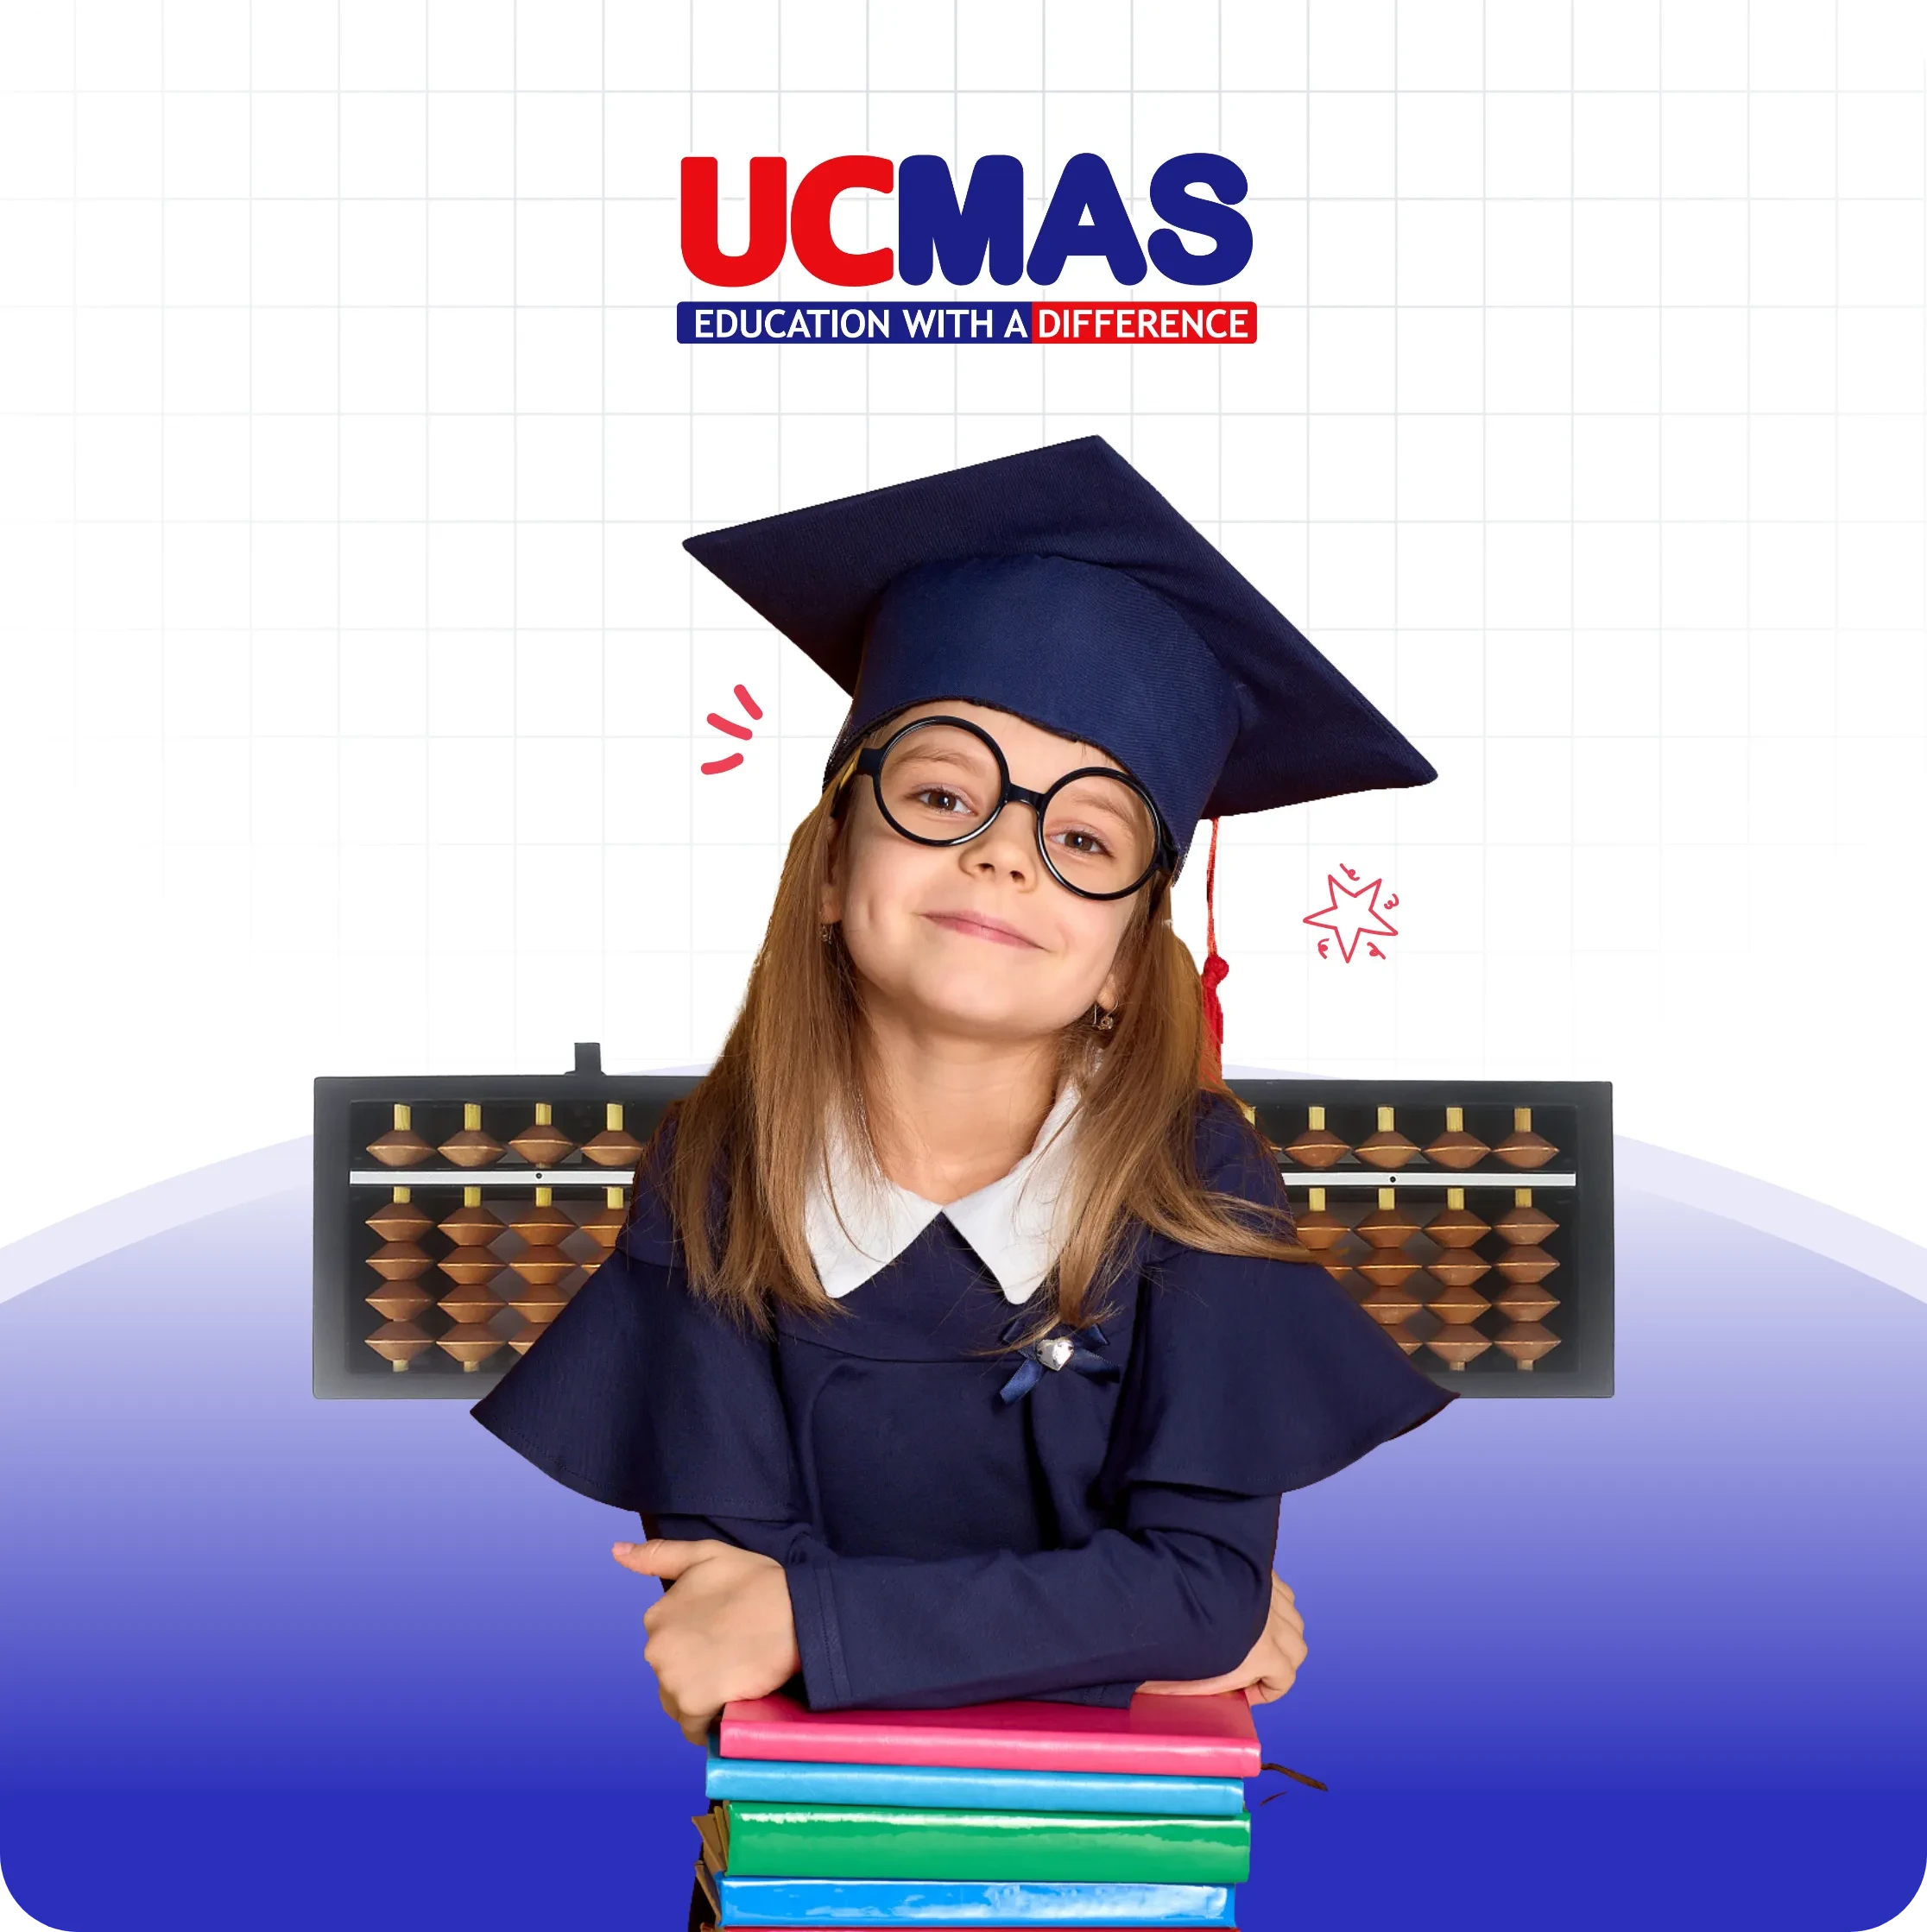 What is the ucmas philosophy?